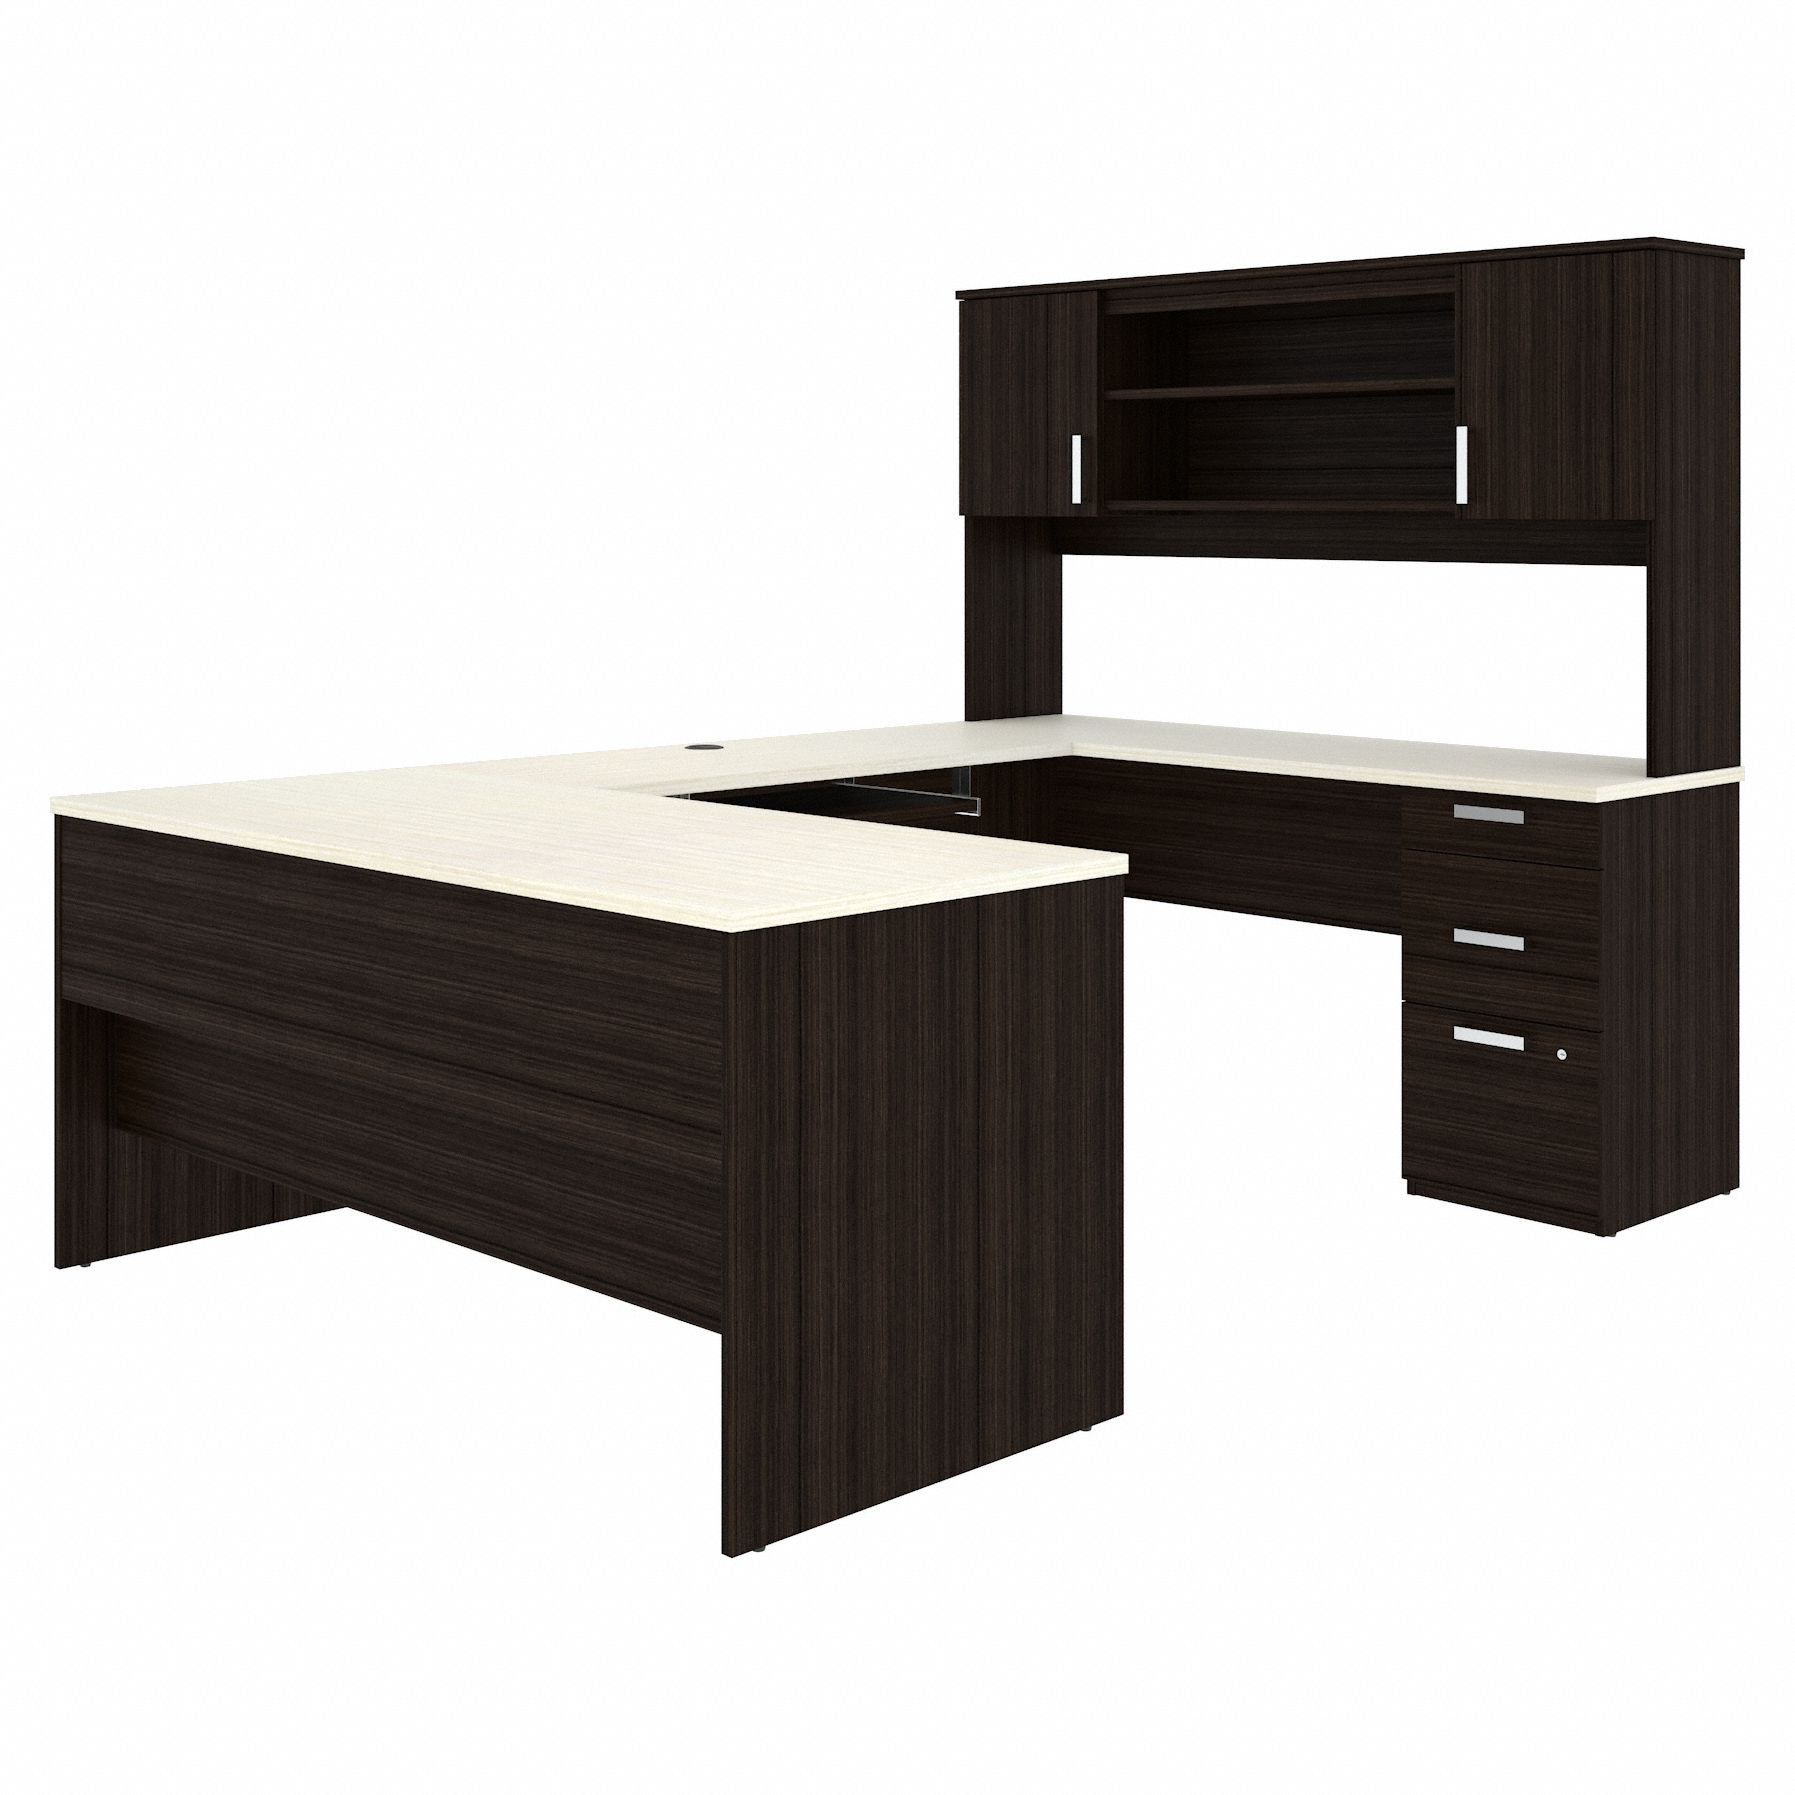 U-Shape Desk: Ridgeley Series, 65 in Overall Wd, 65 29/32 in Overall Ht